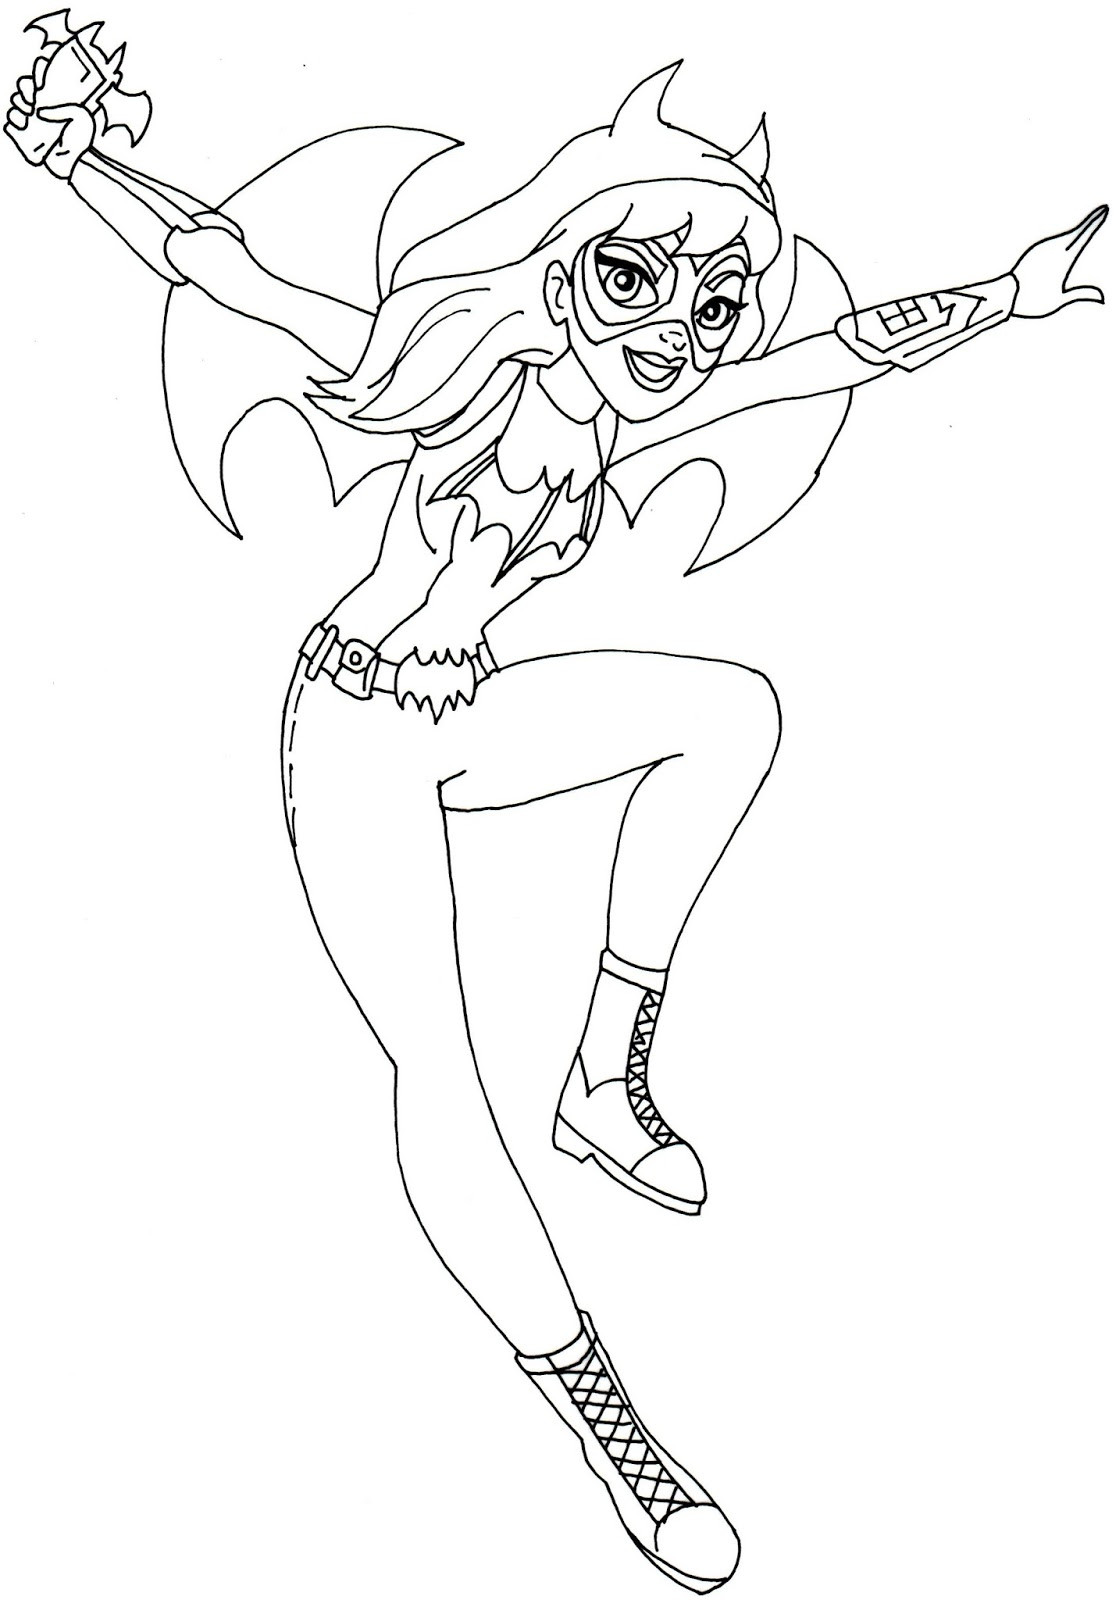 Coloring Pages : Batgirl Coloring Pages Image Result For ...